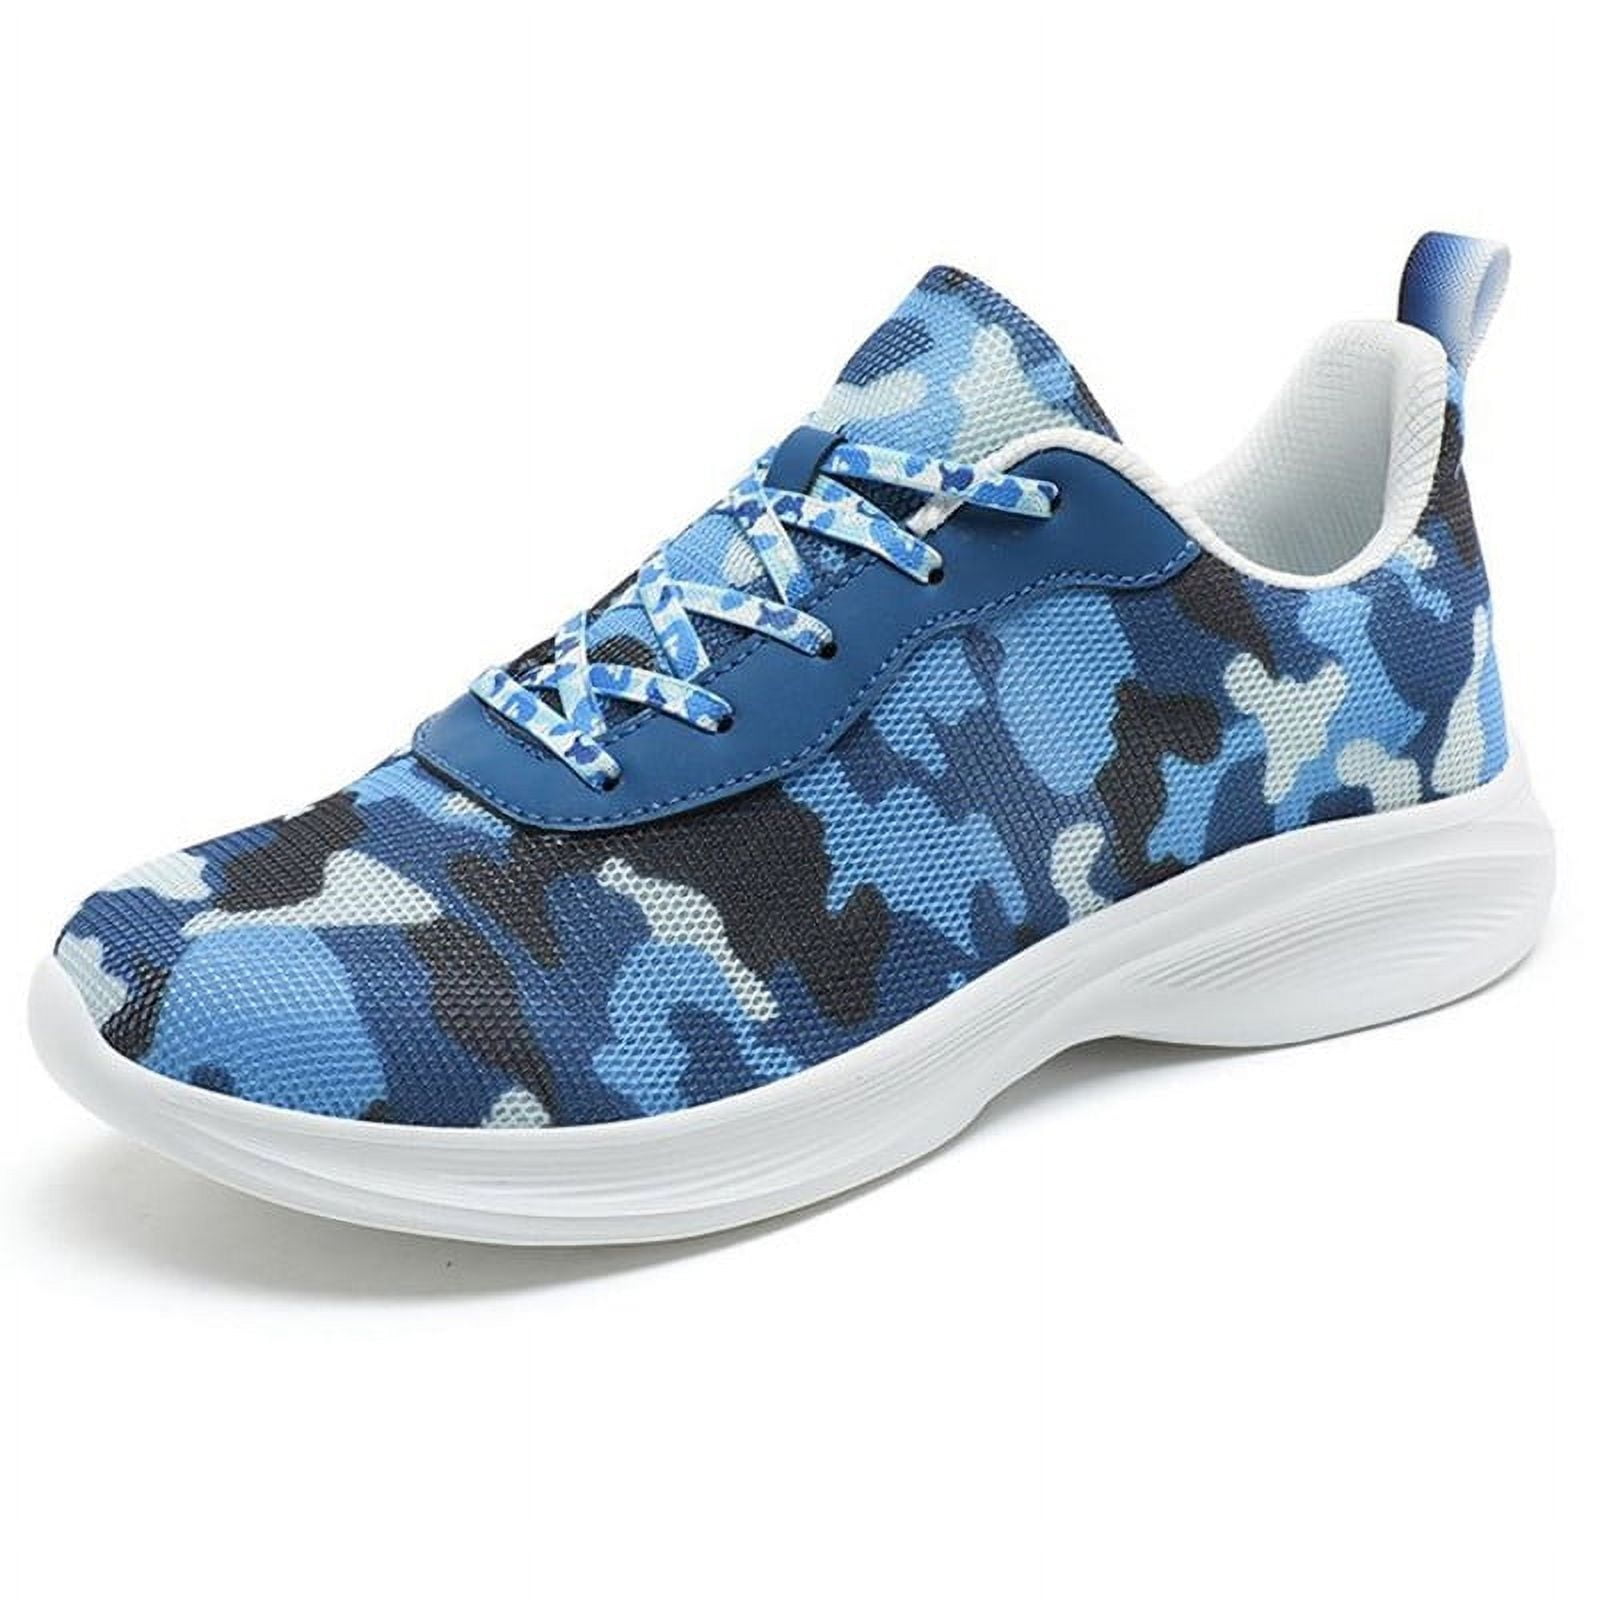 HEBELEENA Camouflage Running Shoes for Women Walking Tennis Shoes Non ...